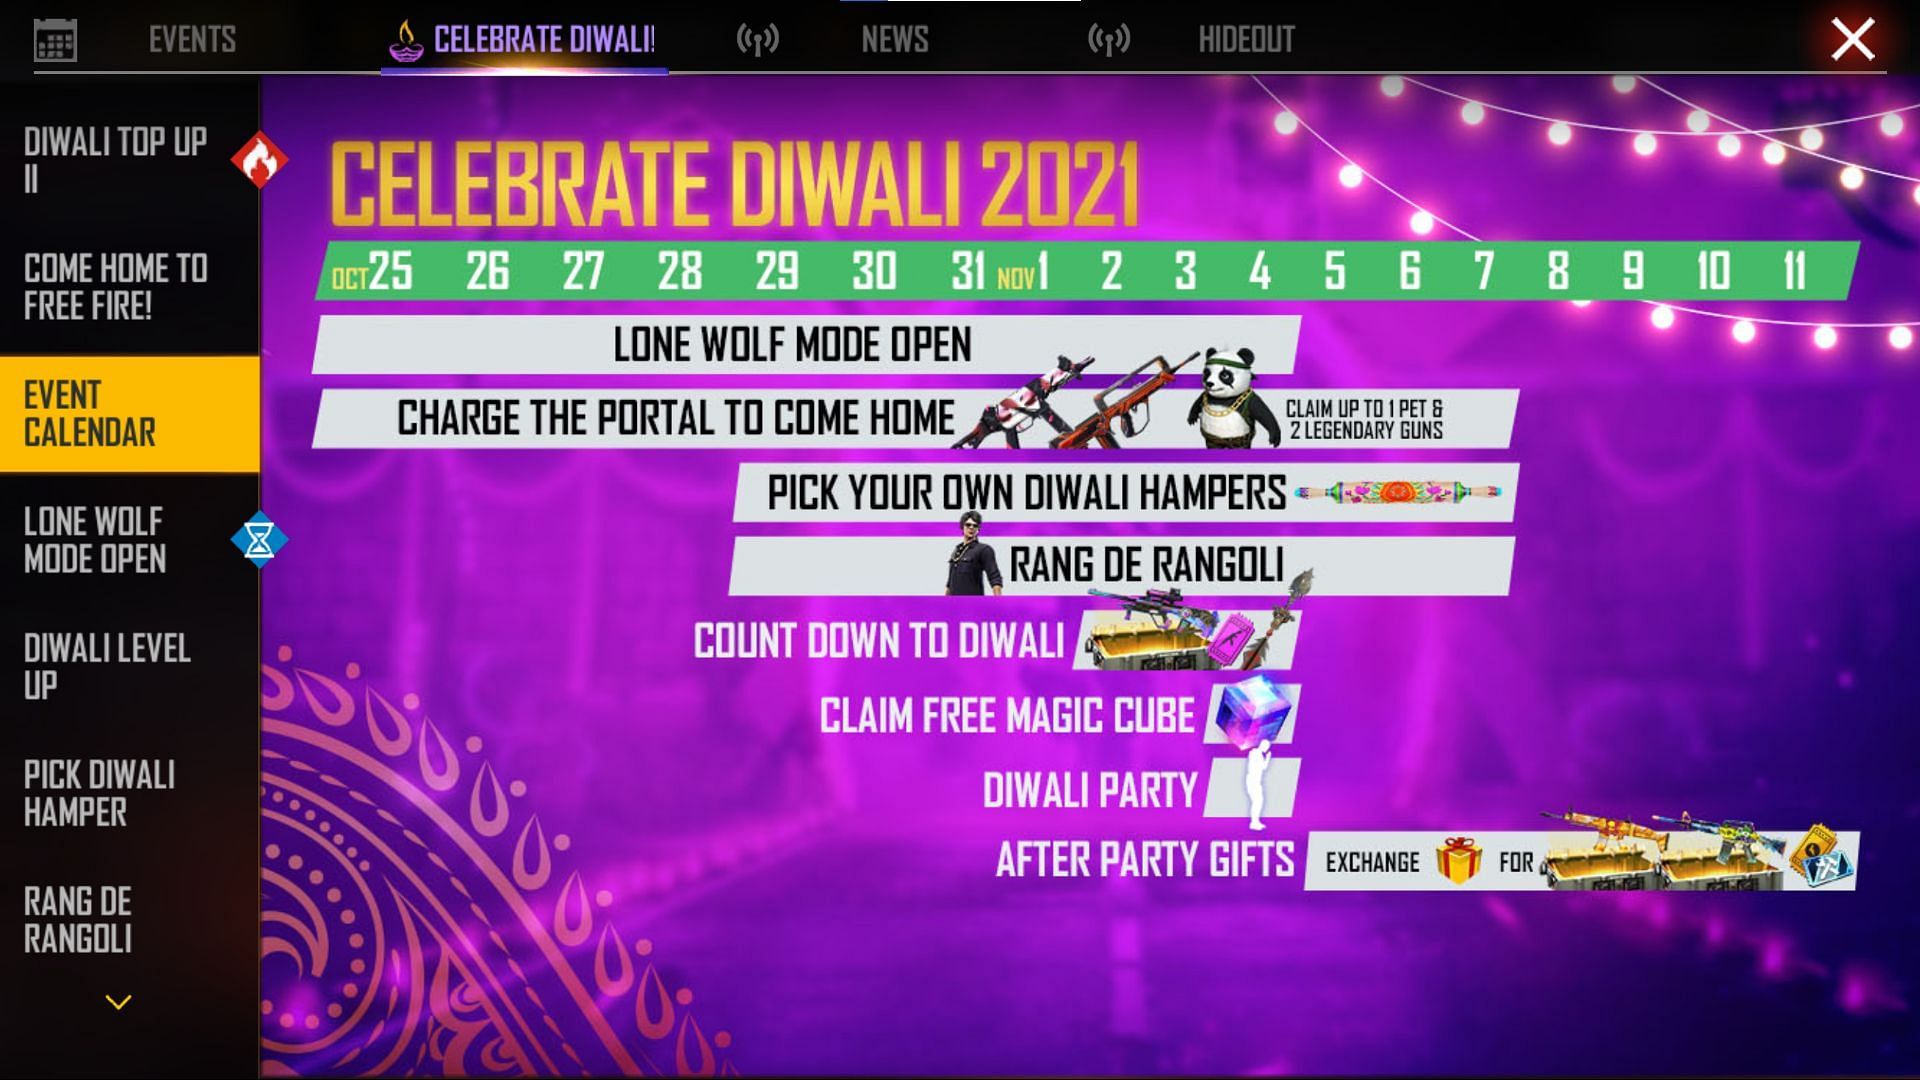 This is the Diwali event calendar (Image via Free Fire)